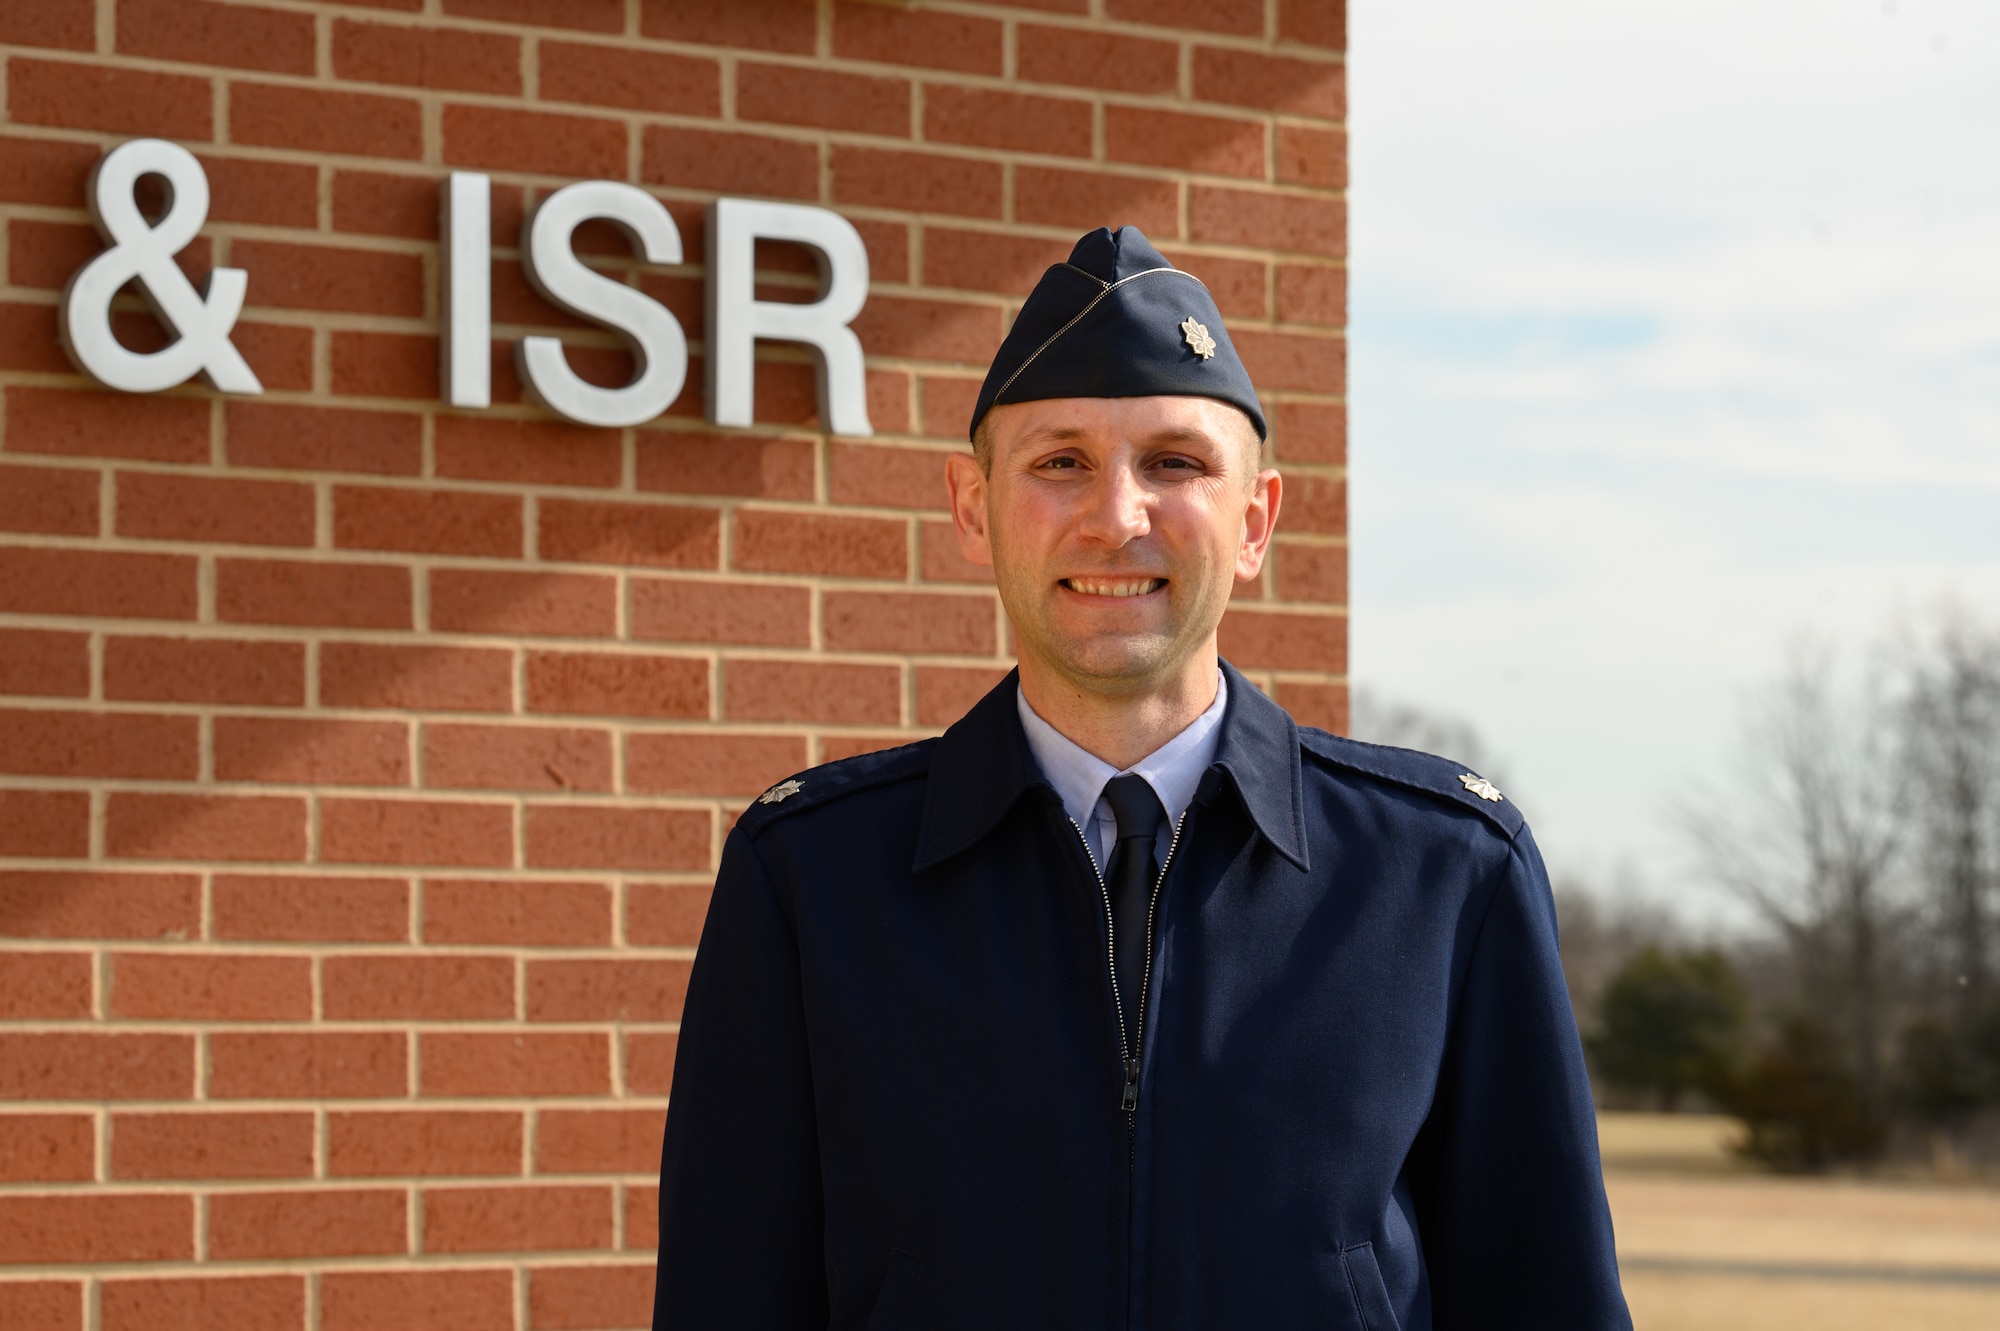 U.S. Air Force Lt. Col. John Ippoliti, incoming 135th Intelligence Squadron commander, poses for a photo Feb. 12, 2022, before a change of command ceremony for the 135th IS at Warfield Air National Guard Base at Martin State Airport, Middle River, Maryland. The 135th IS provides signals intelligence expertise using classified sources to collect information so our Air Force and other partners can make better decisions and prepare either policymakers or warfighters to be more effective. (U.S. Air National Guard photo by Staff Sgt. Sarah M. McClanahan)